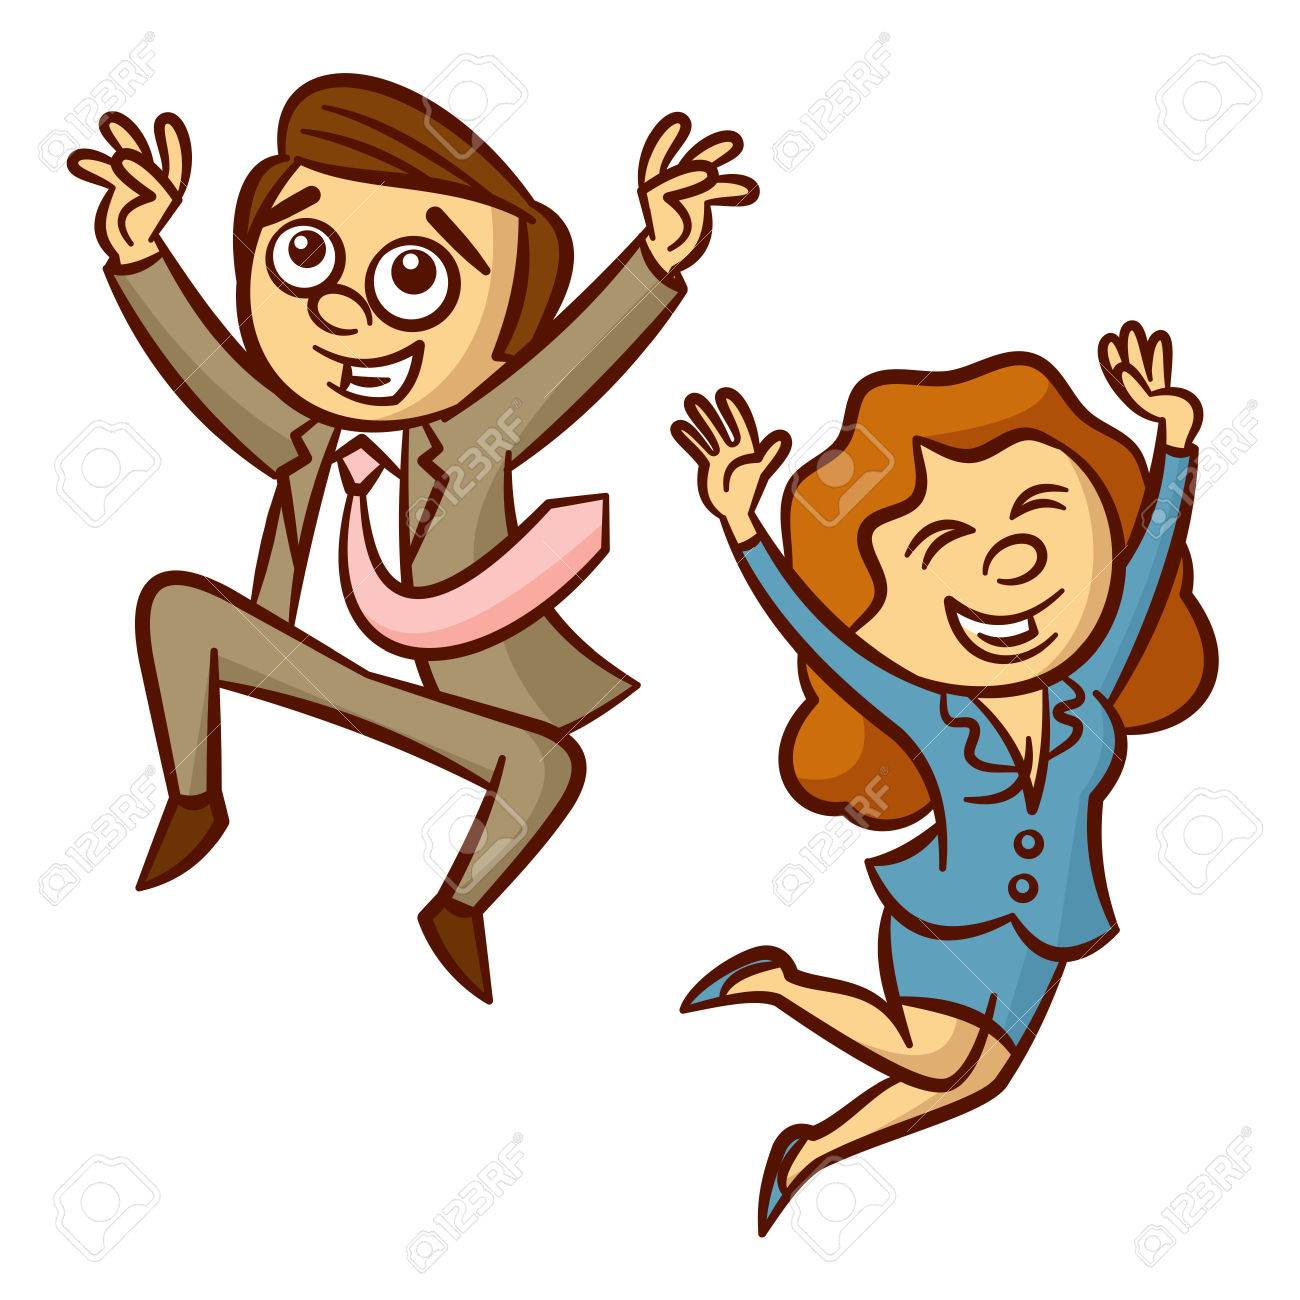 Happy Jumping Business People Clipart Stock Vector - 61250314